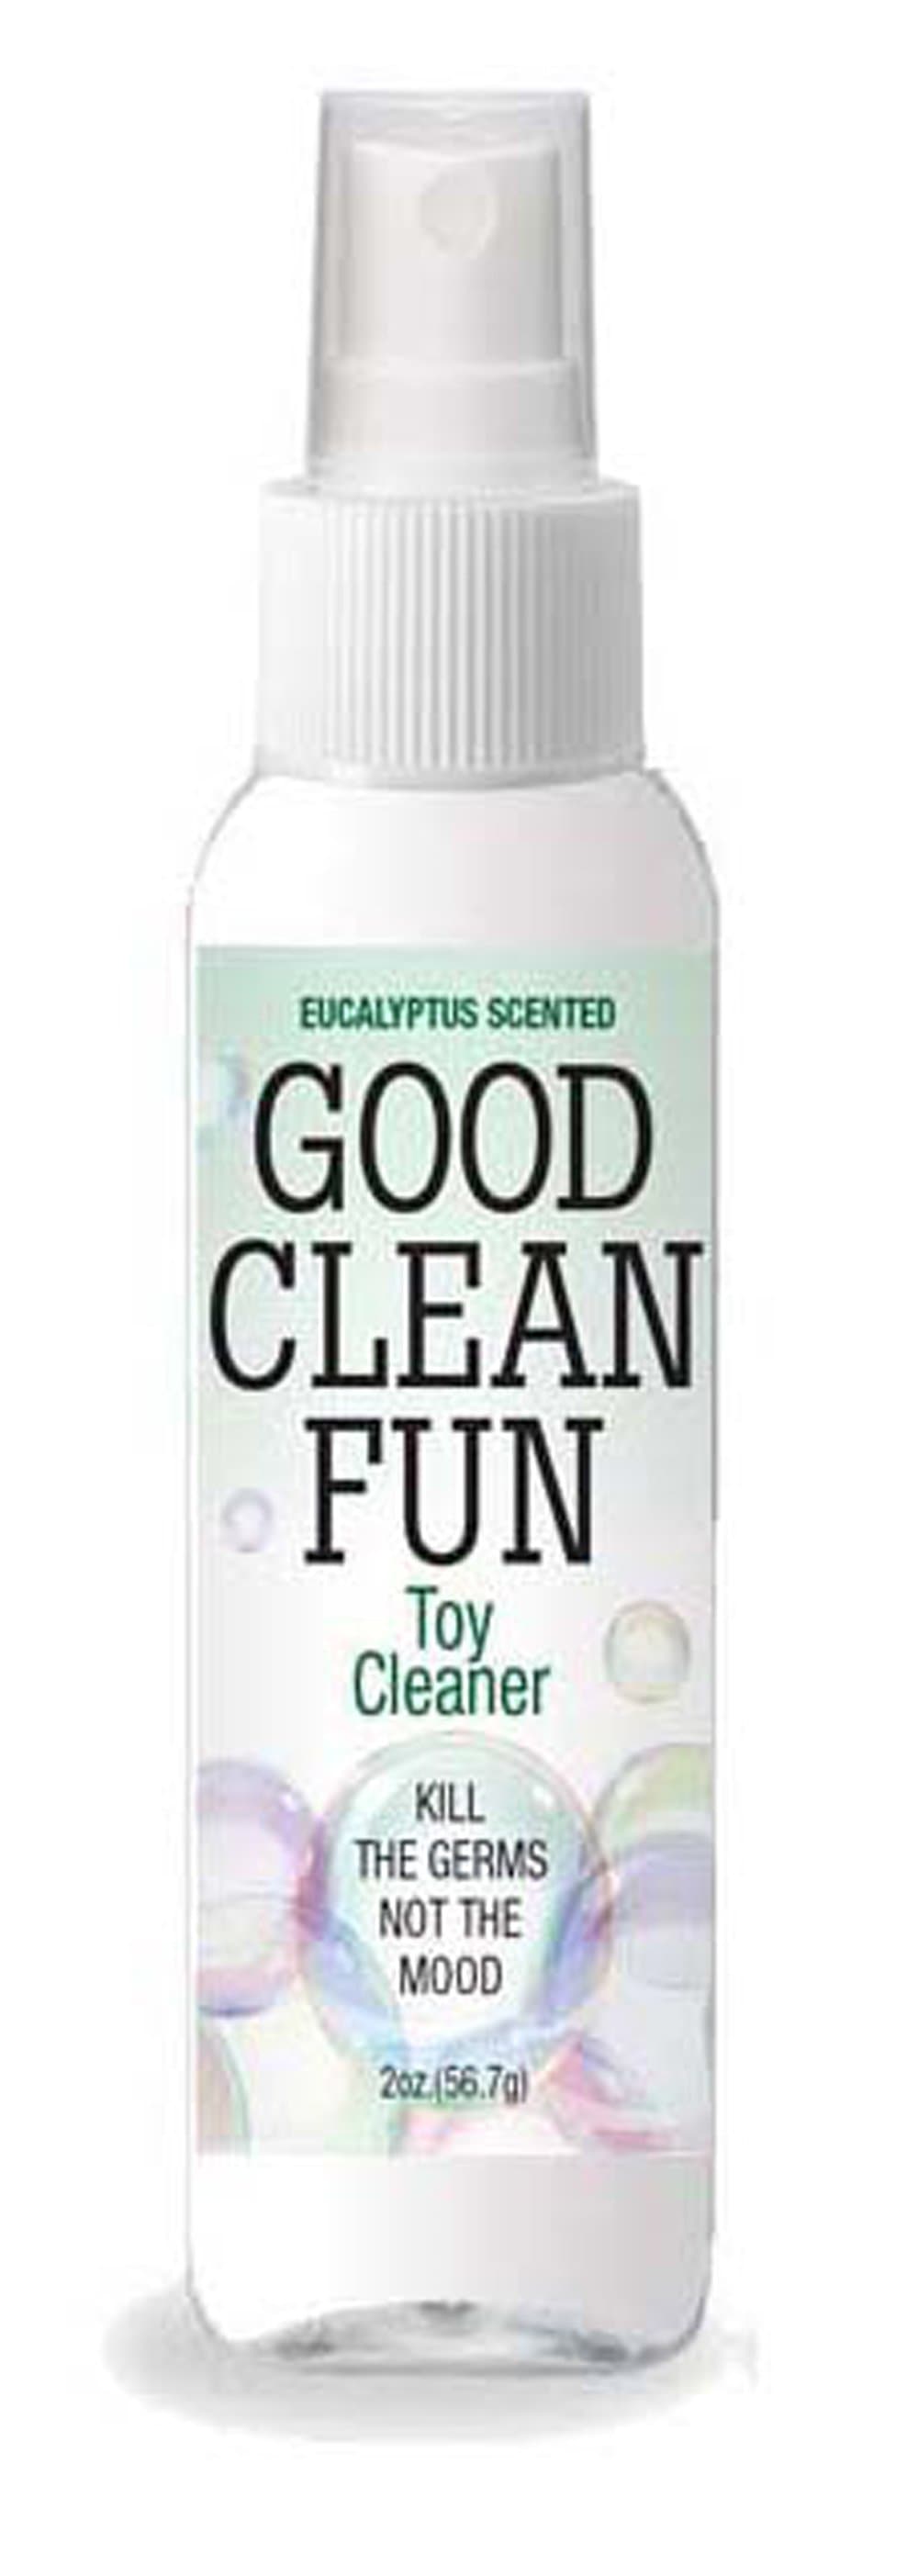 sex toy cleaner, how to clean sex toys